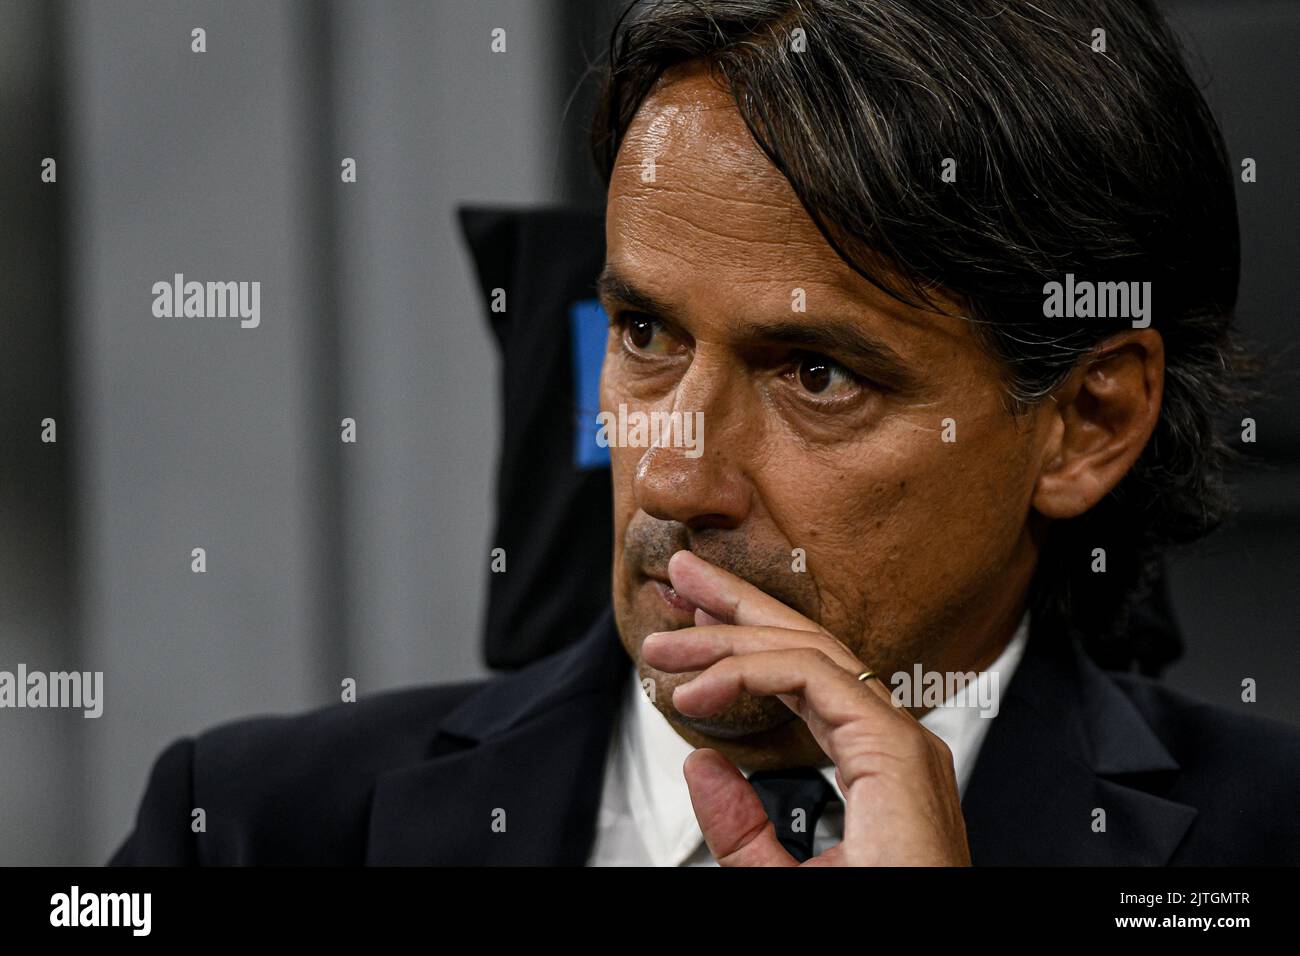 Simone Inzaghi, head coach of FC Internazionale during the Italian Serie A football match FC Internazionale vs Cremonese at San Siro stadium in Milan, Italy on 30/08/22 Stock Photo